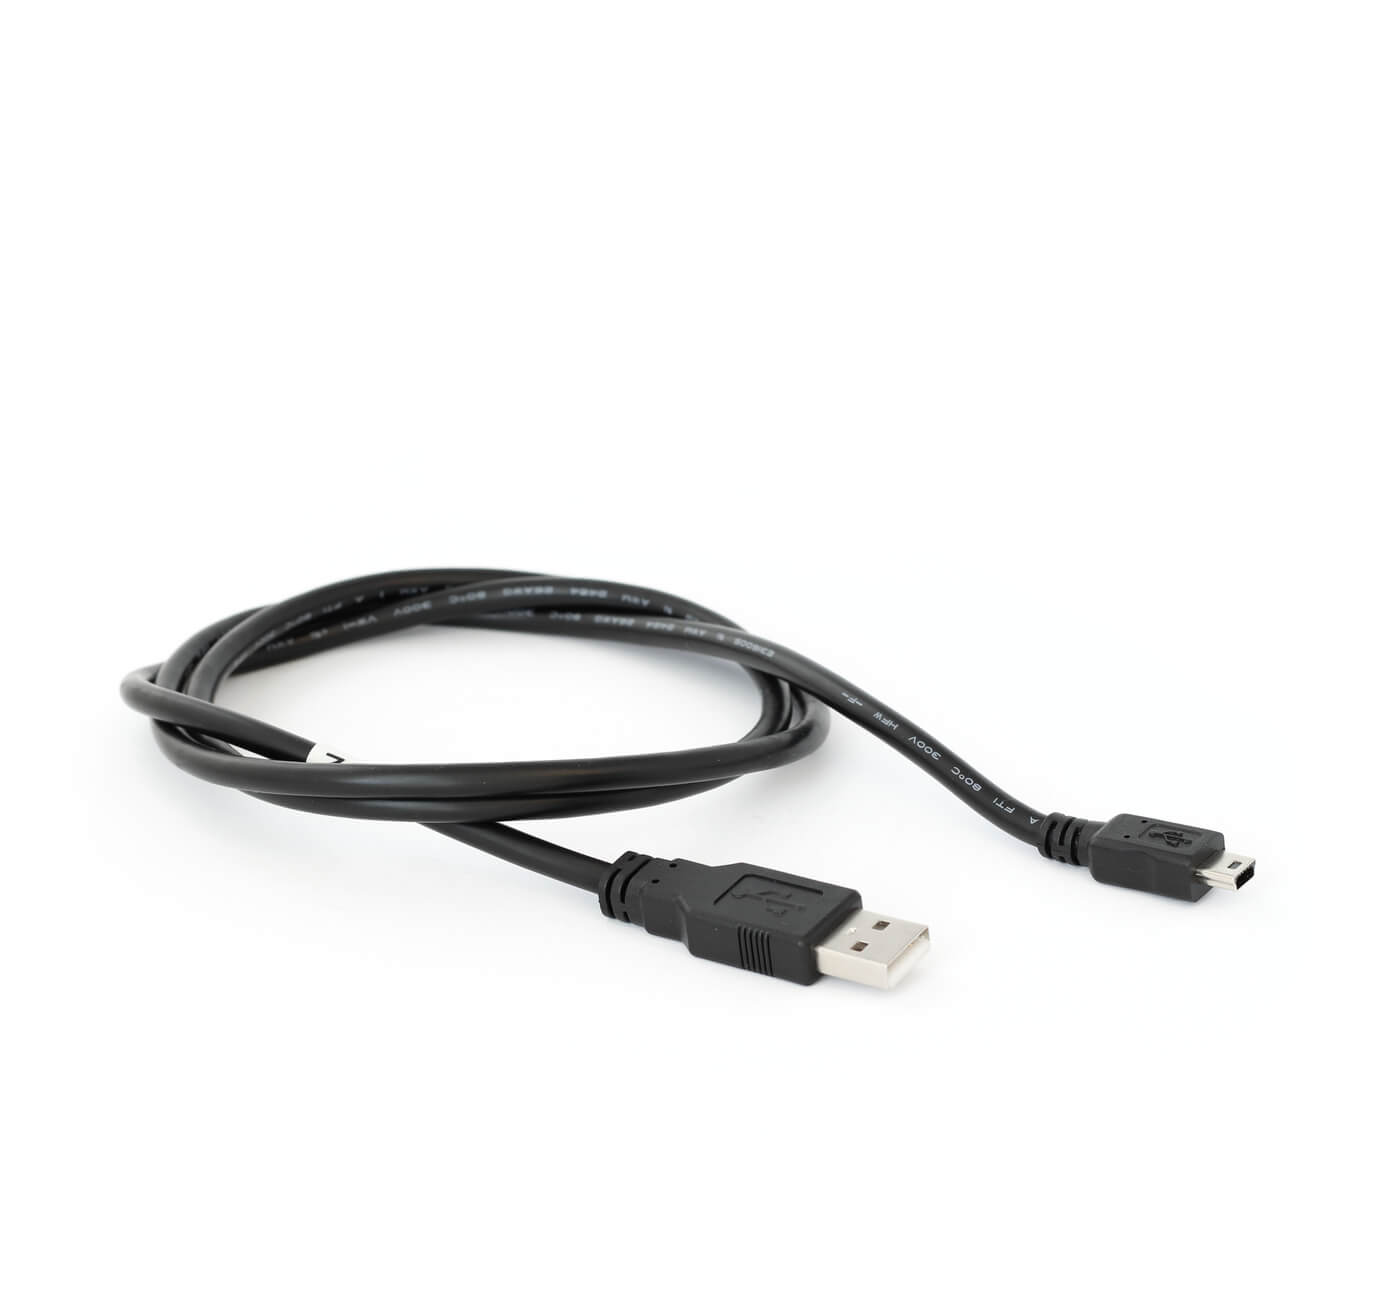 Mini USB to USB adapter cable